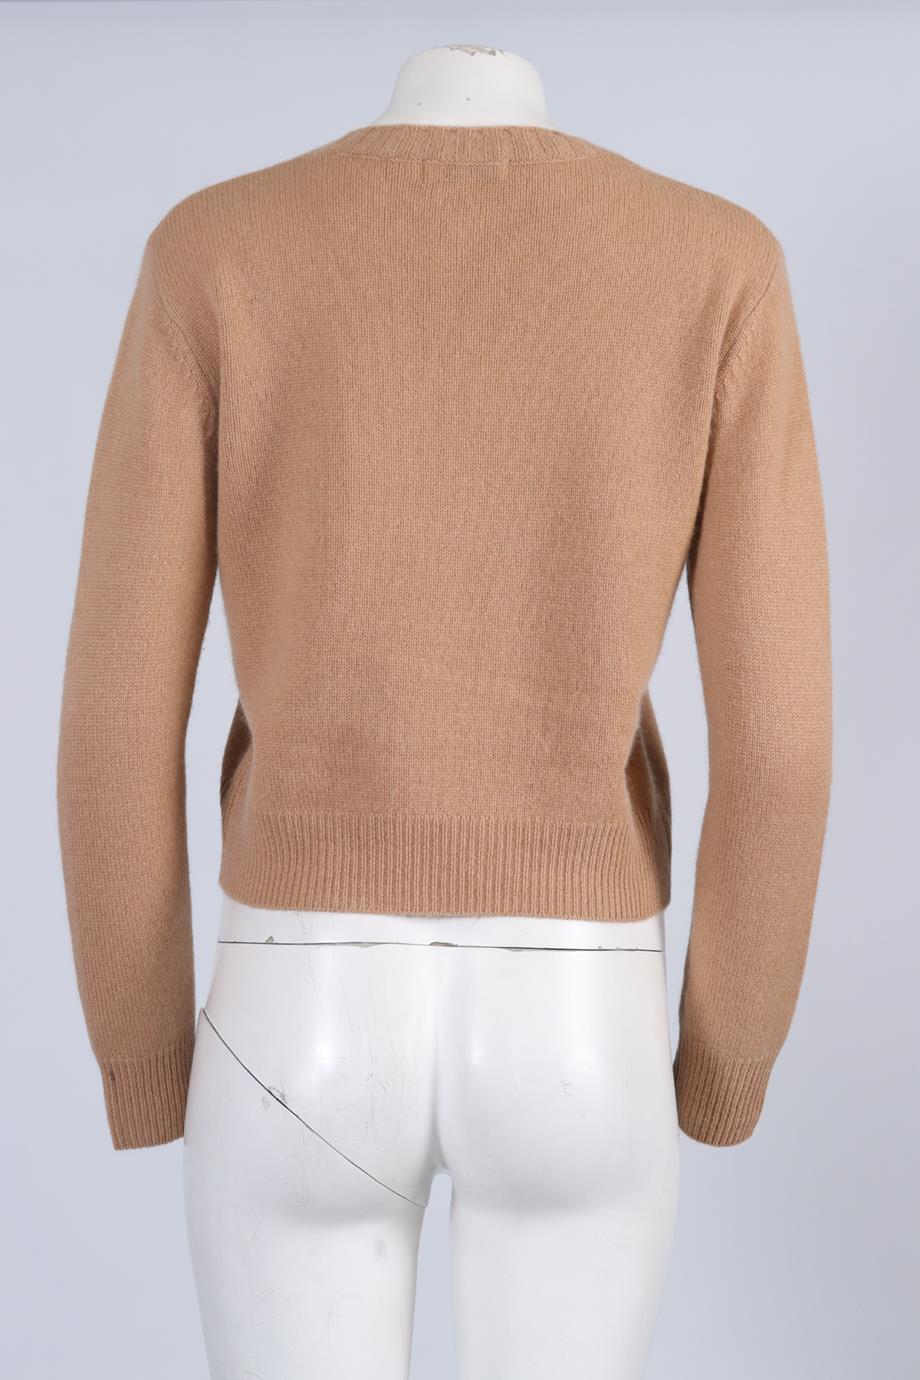 SPORTY & RICH CASHMERE SWEATER XSMALL